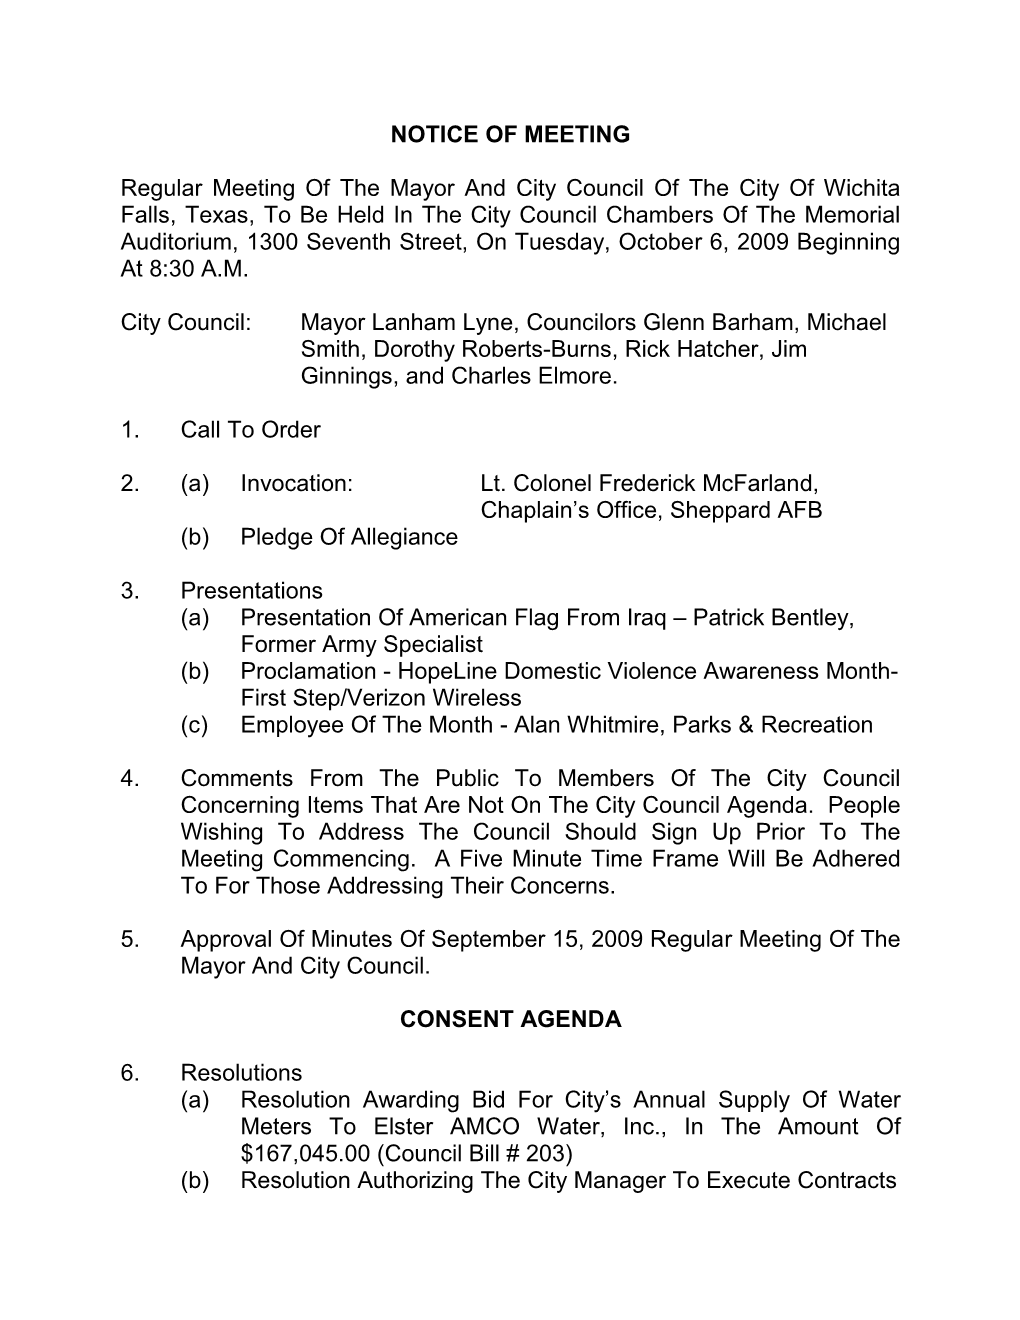 NOTICE of MEETING Regular Meeting of the Mayor and City